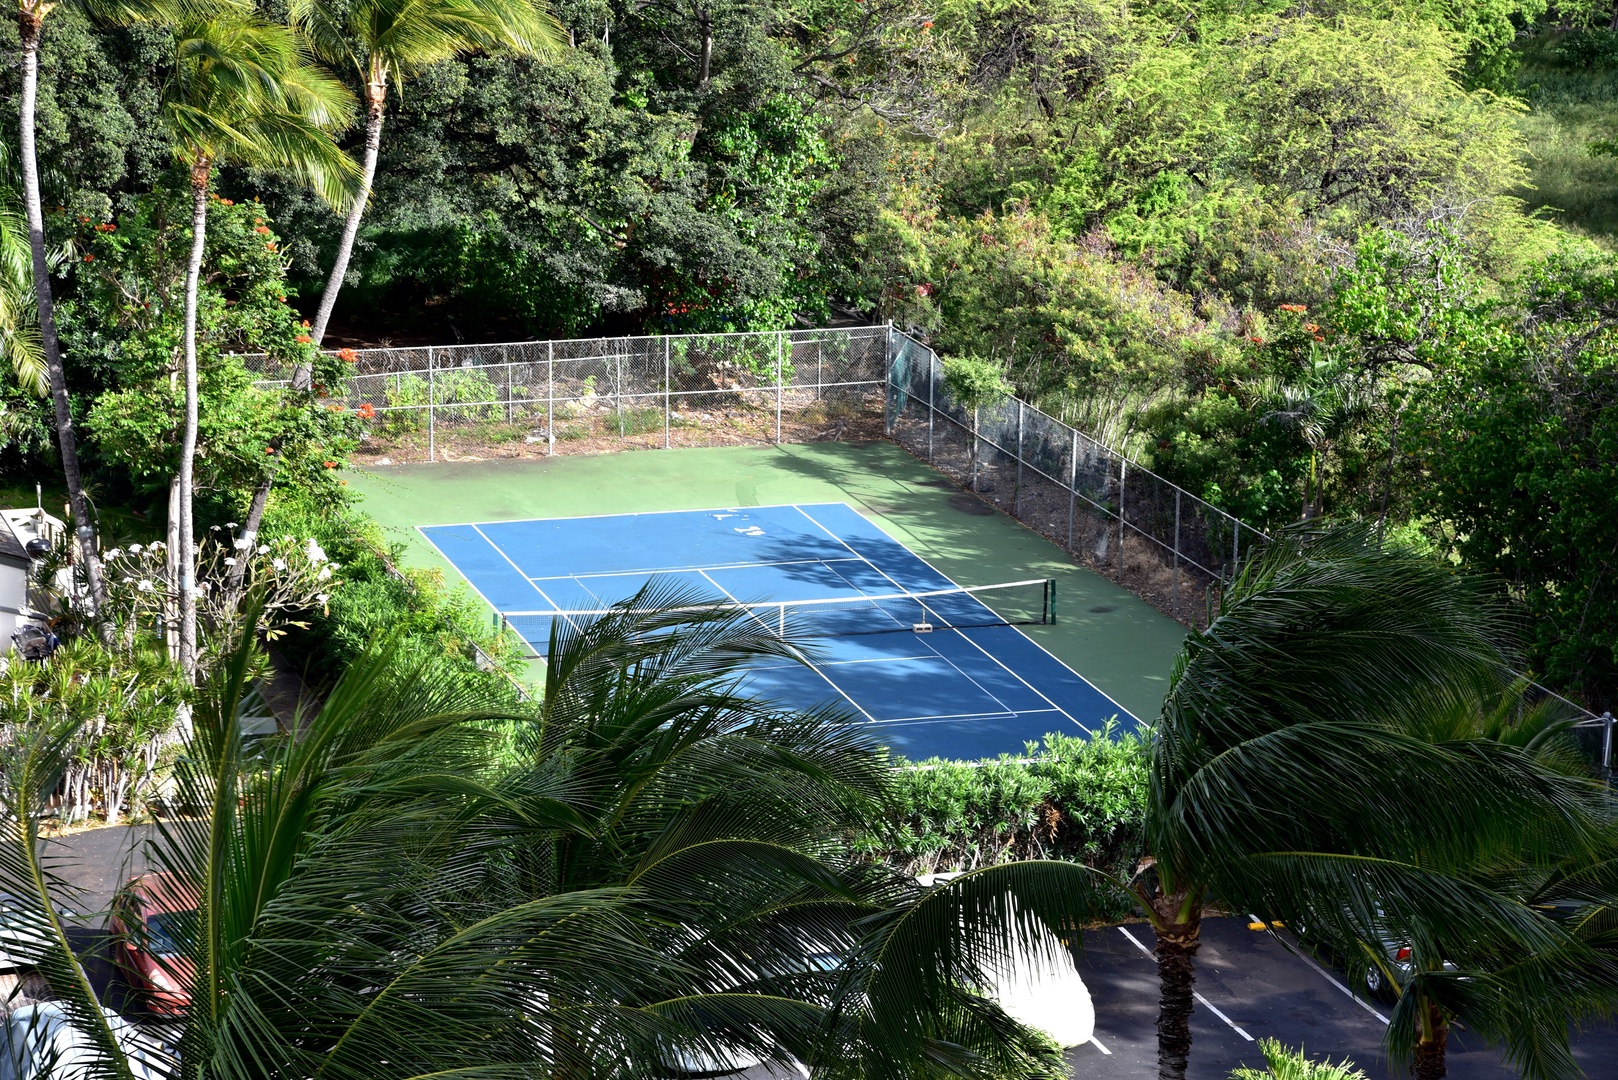 Waianae Vacation Rentals, Makaha - Hawaiian Princess - 305 - An aerial view of the tennis courts surrounded by lush greenery.